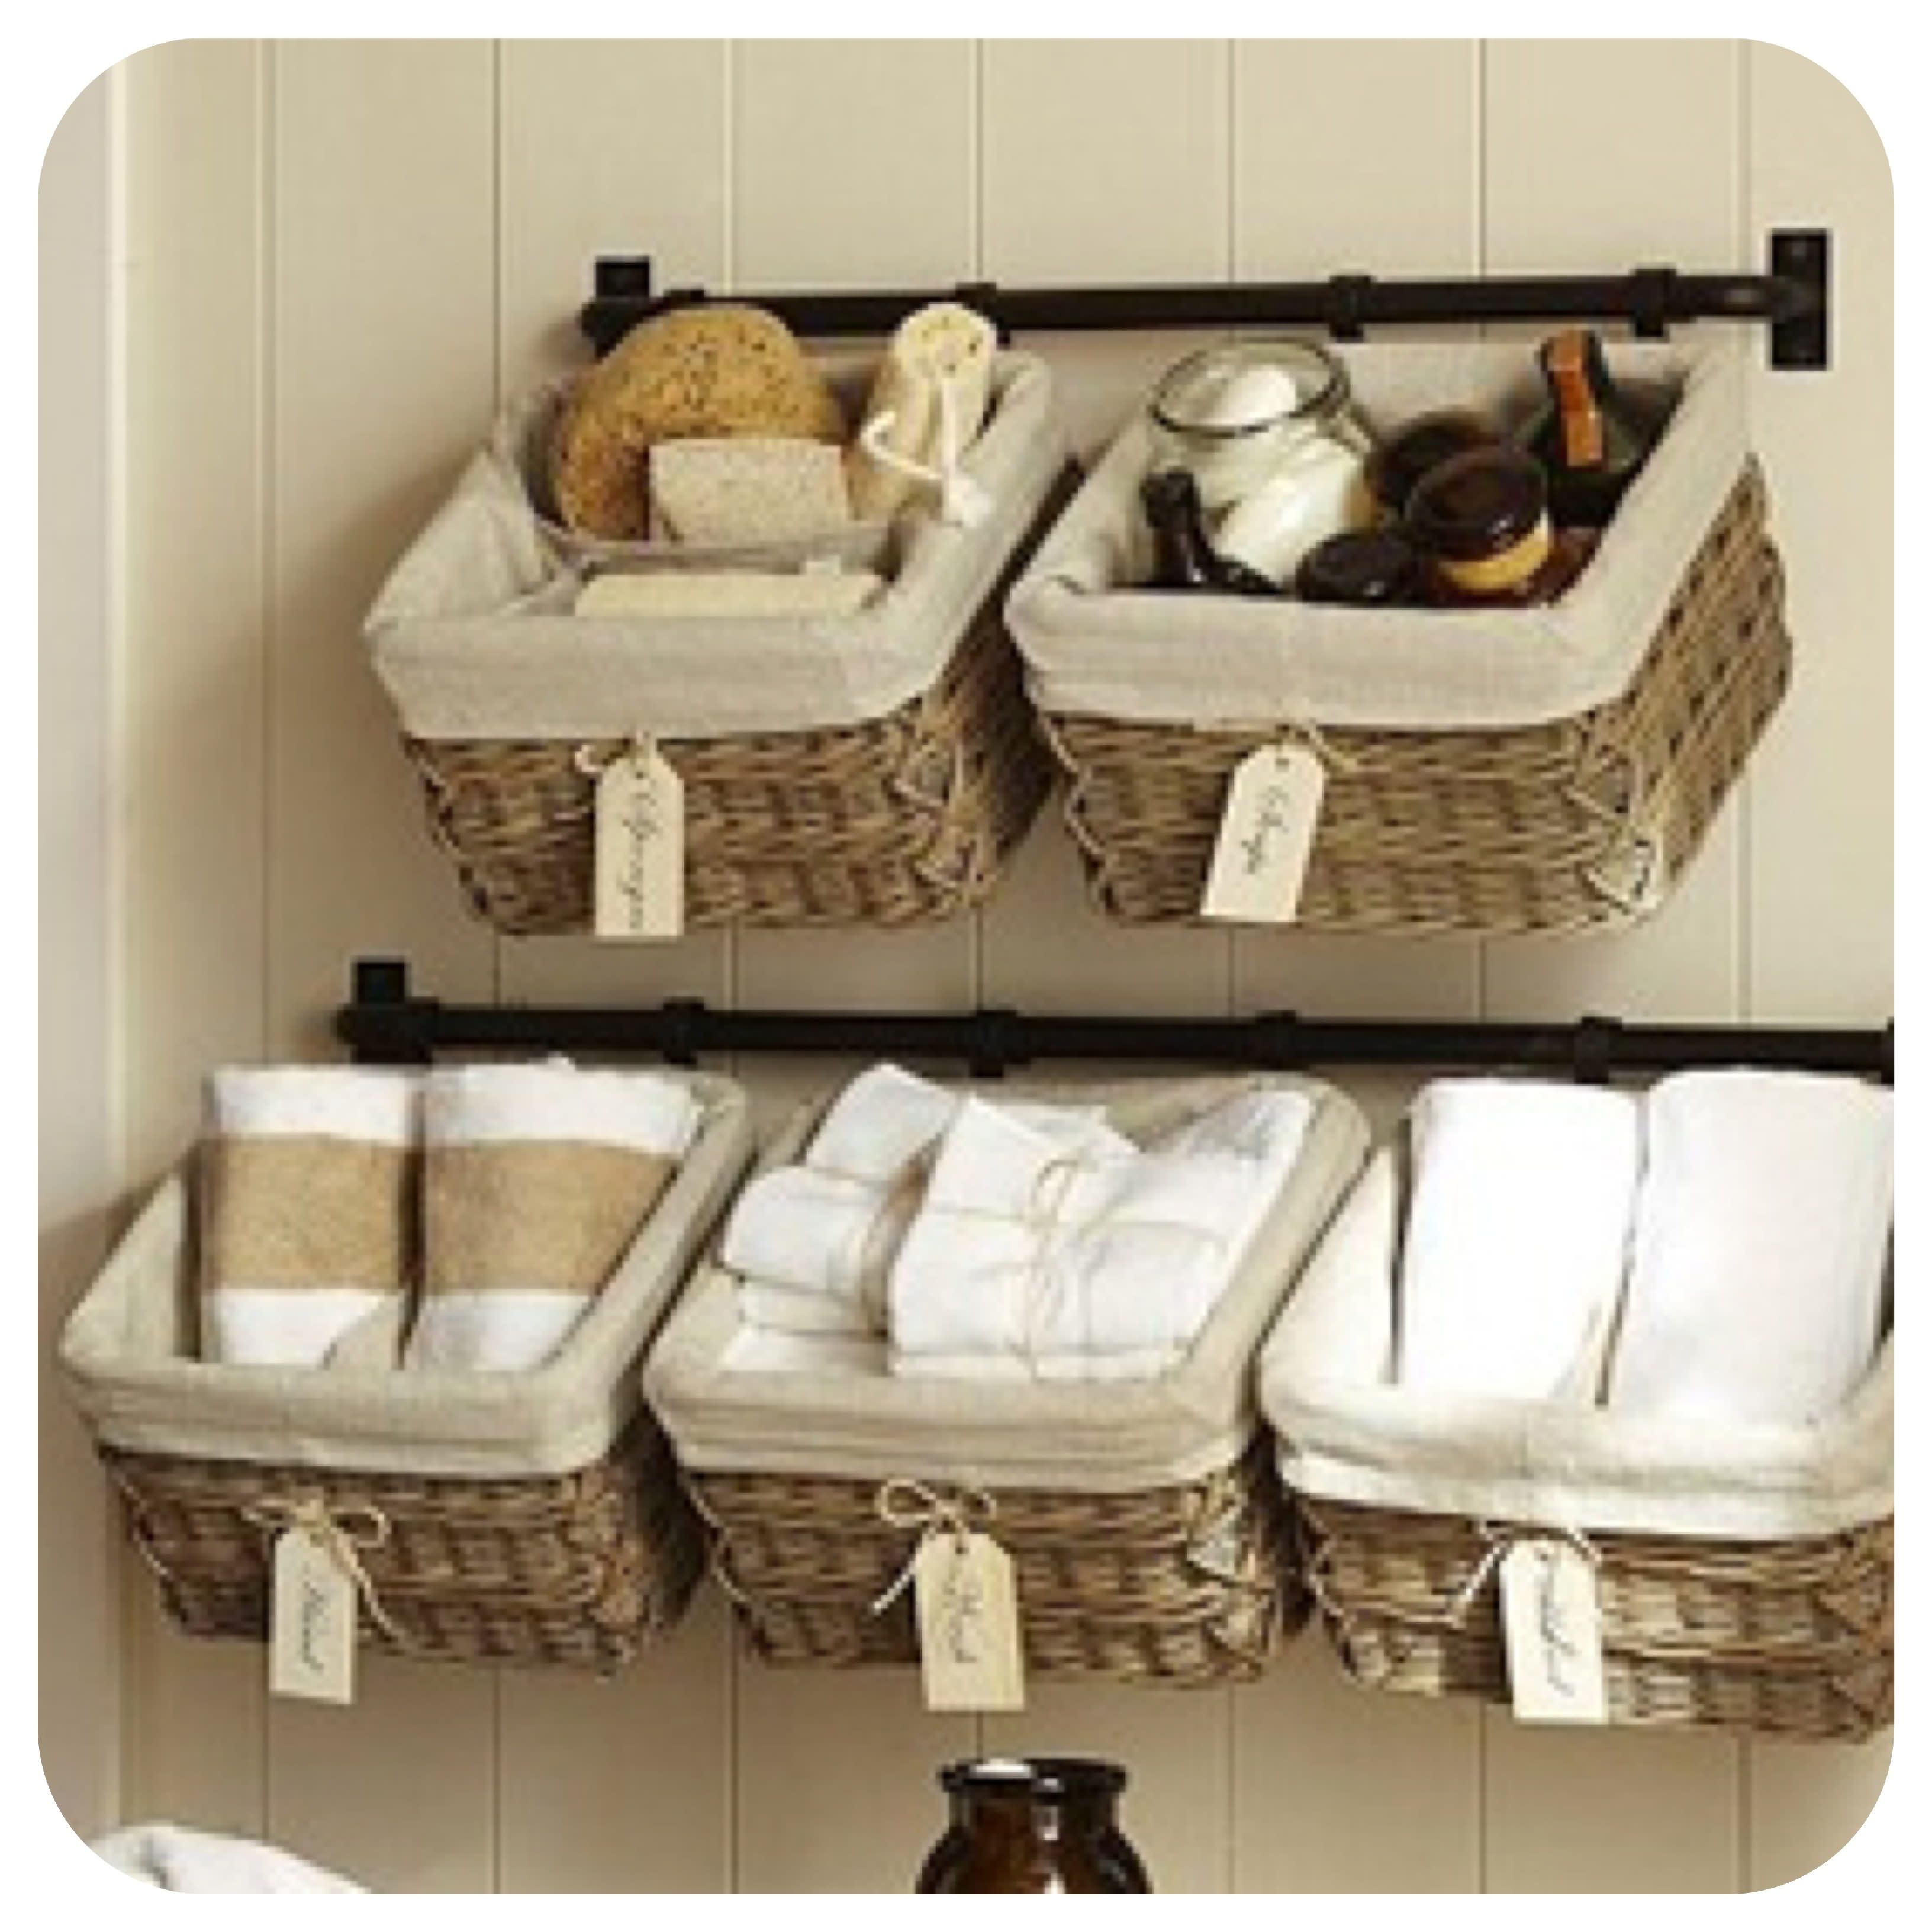 How to Organize Your Bathroom | Towels, Organizing and Bathroom ...